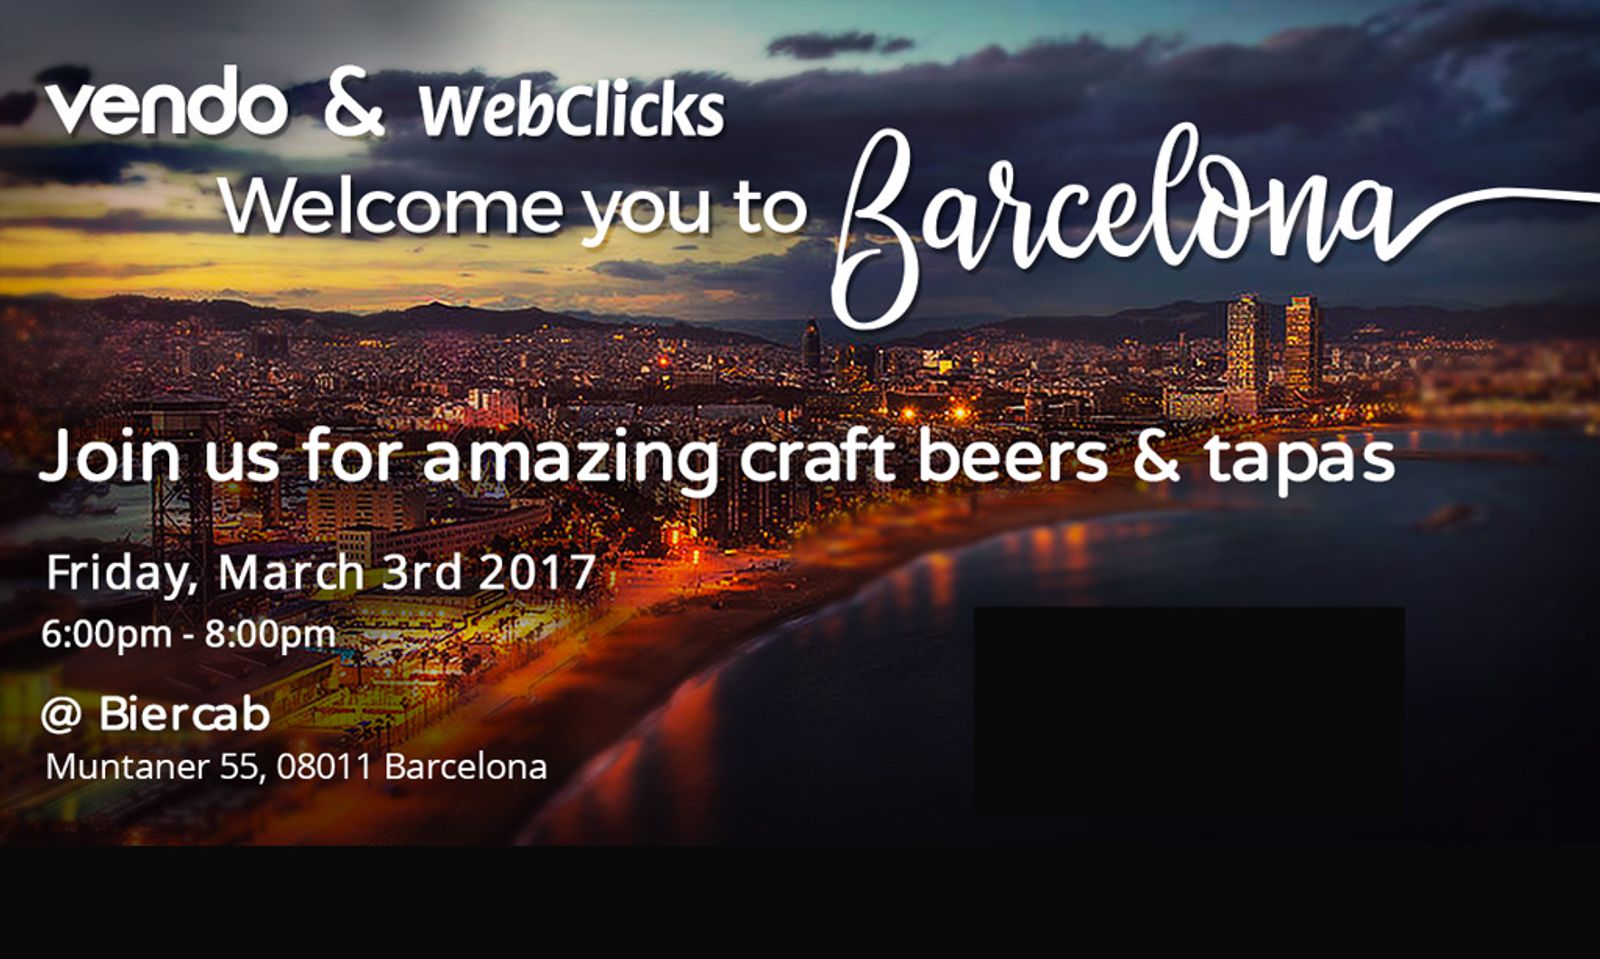 Vendo, WebClicks Introduce Two New Beers at Industry Event in Barcelona